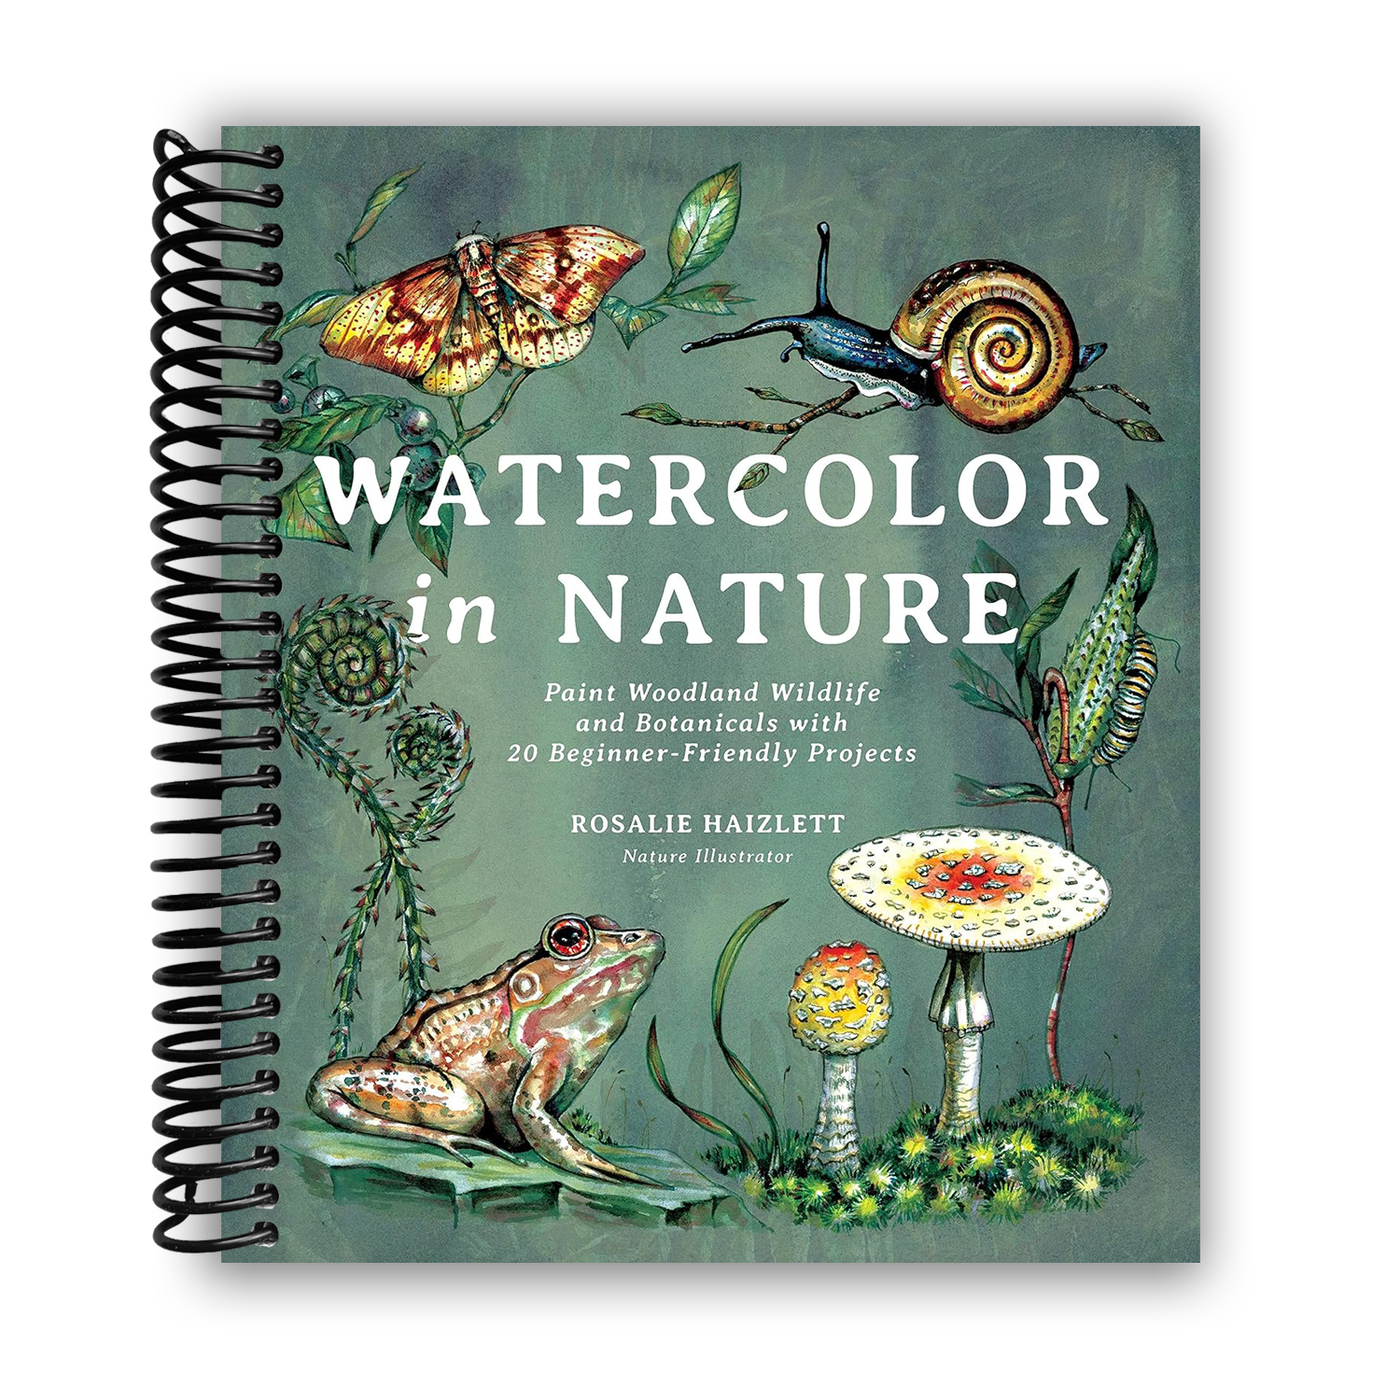 Watercolor in Nature: Paint Woodland Wildlife and Botanicals with 20 Beginner-Friendly Projects (Spiral Bound)